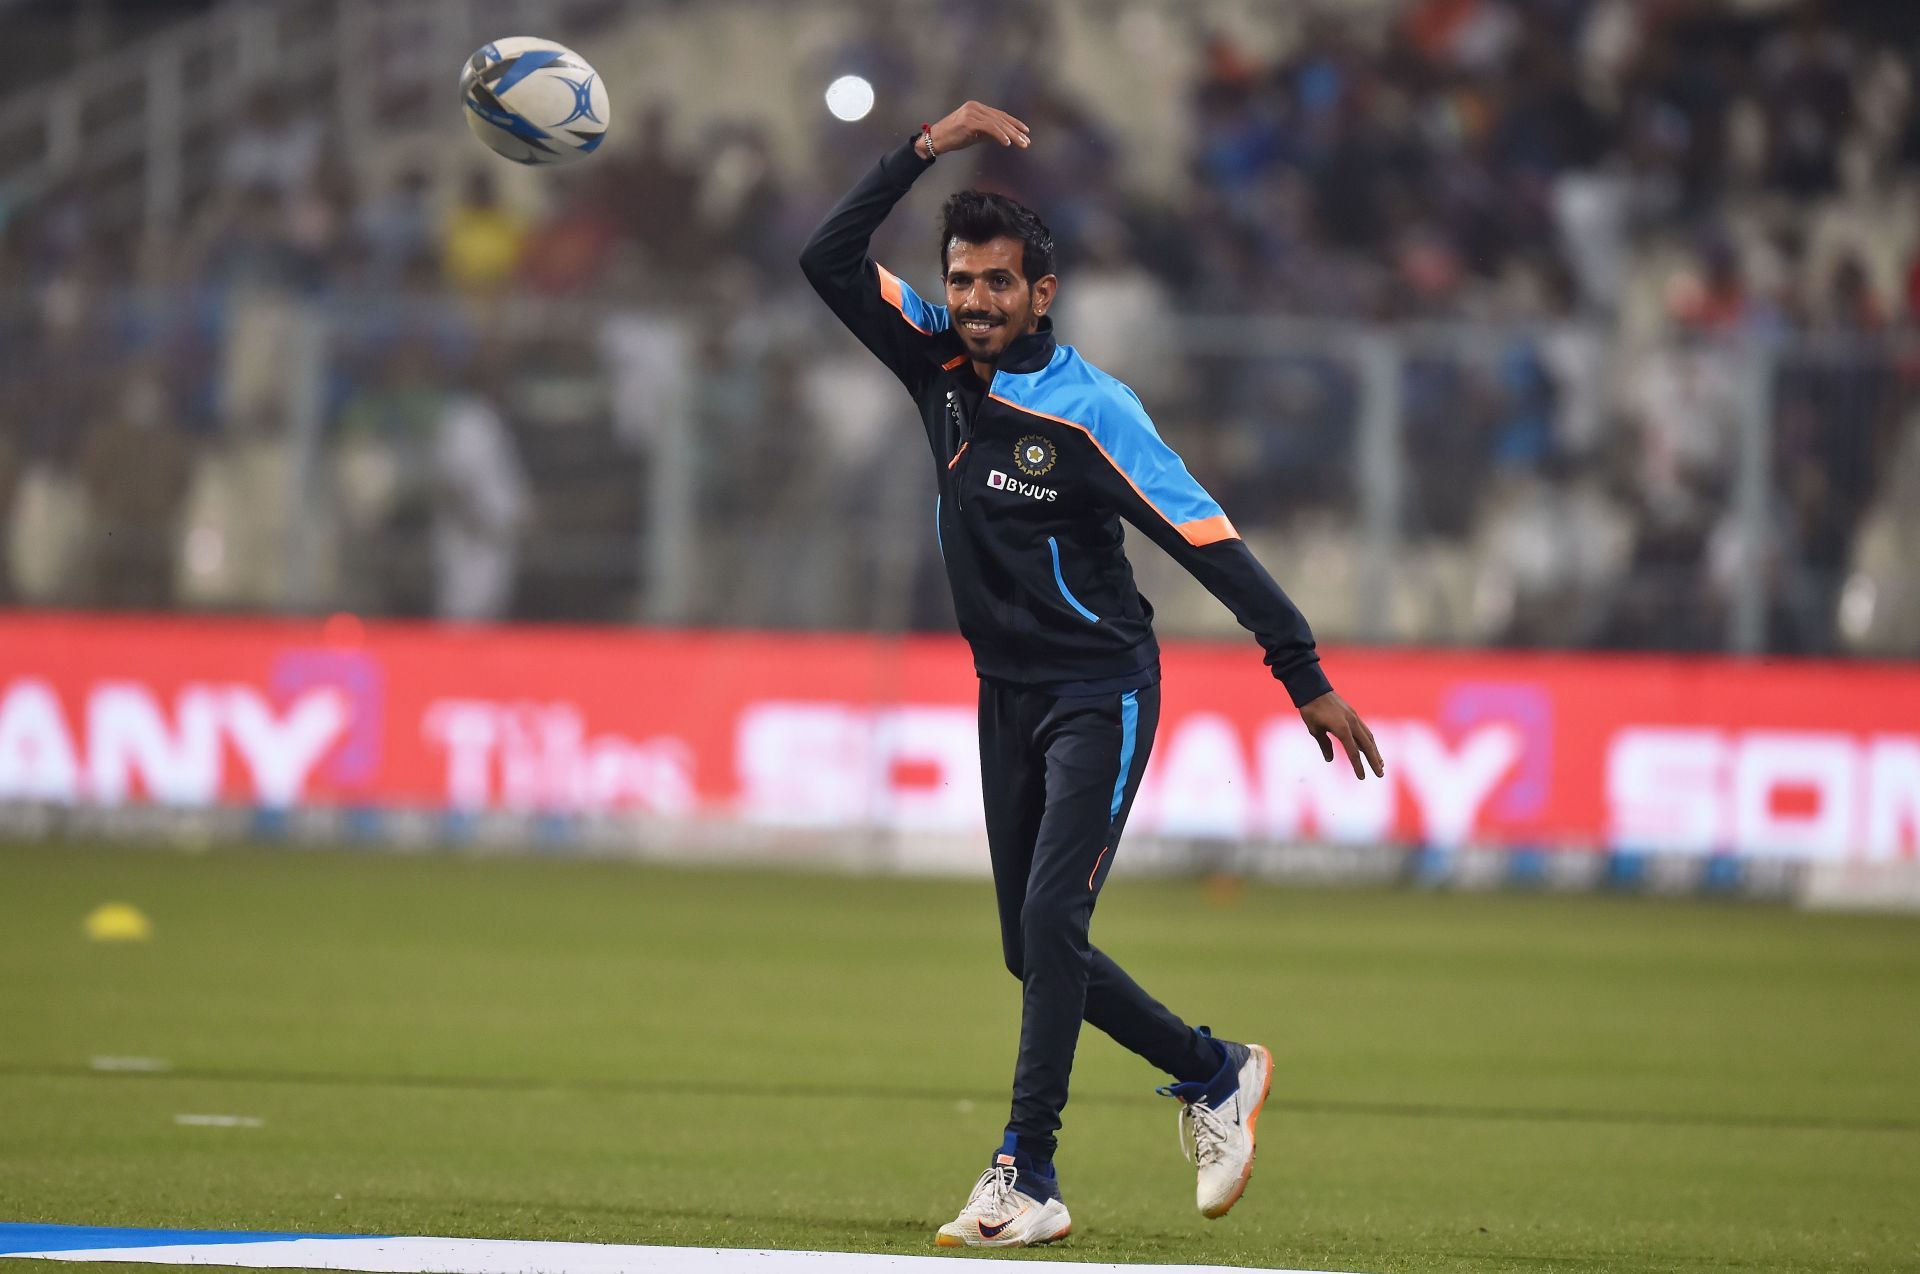 Yuzvendra Chahal was at the top of his game in the Vijay Hazare Trophy